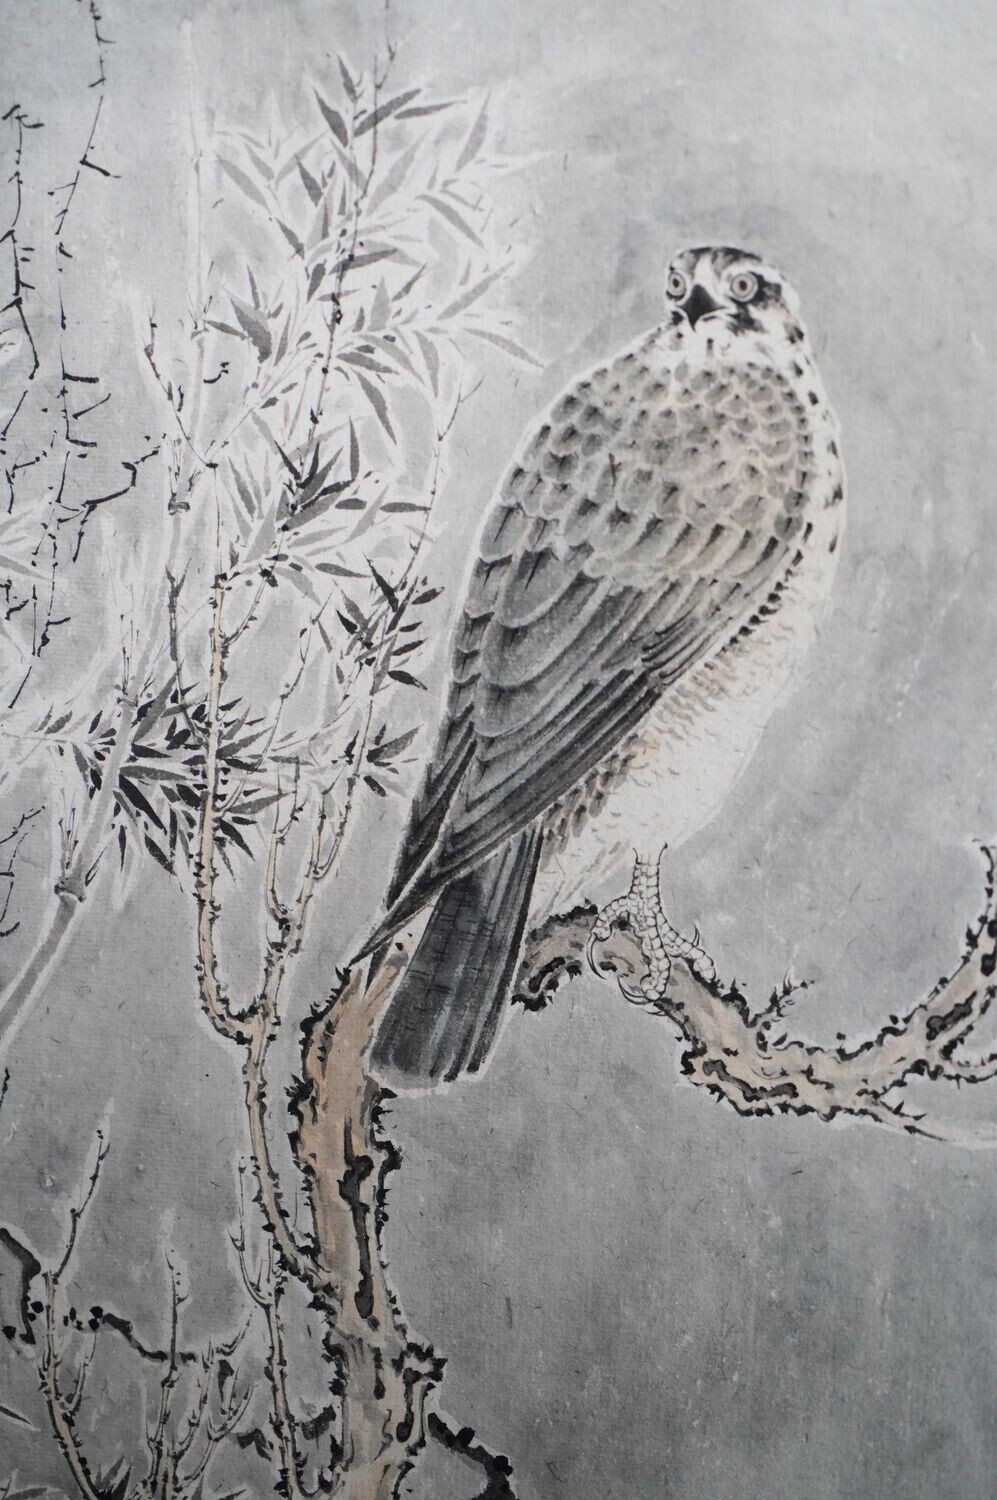 Eagle in The Snow (雪爪星眸)